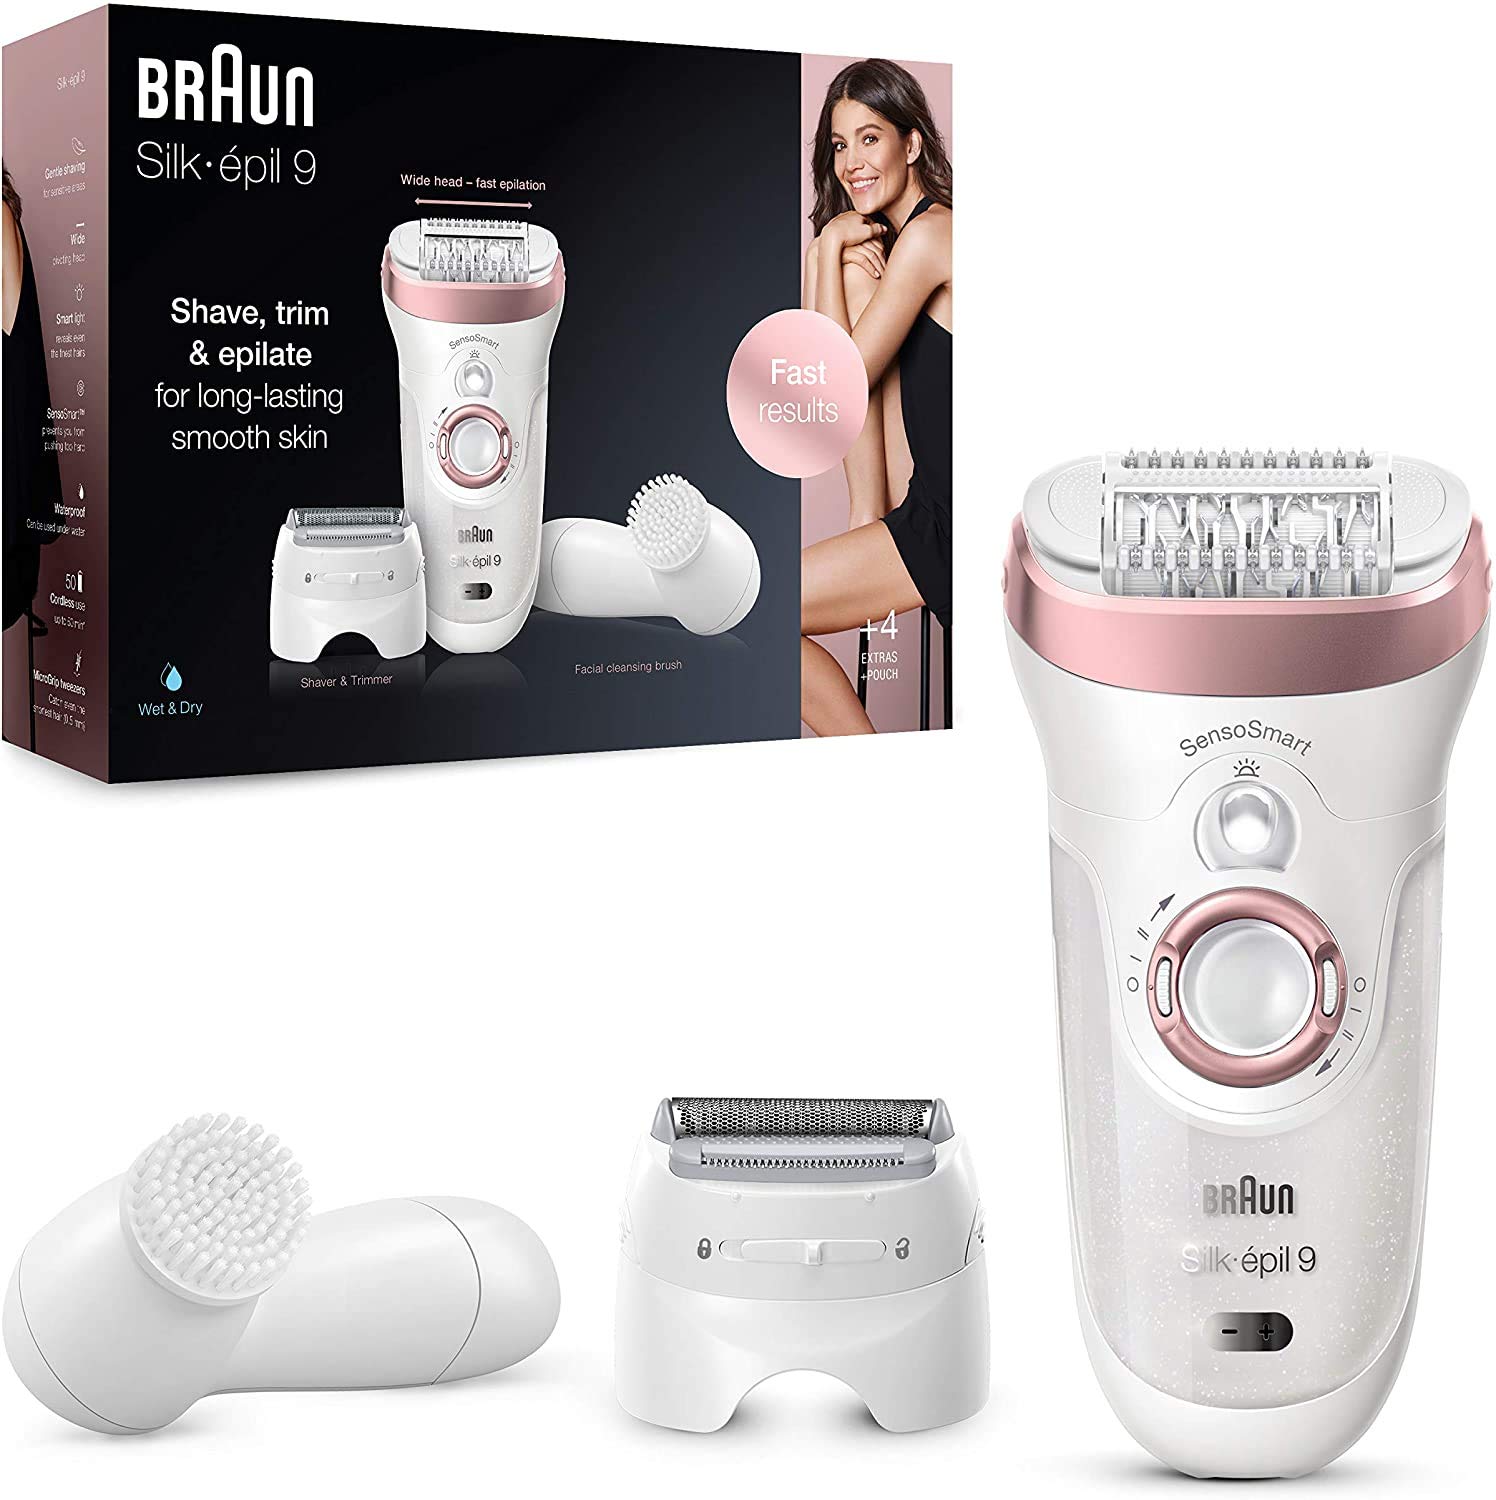 Braun Silk-épil 9-880 Epilator for Long-Lasting Hair Removal Includes a Facial Cleansing Brush High Frequency Massage Cap Shaver and Trimmer Head Cordless Wet and Dry Epilation for Women